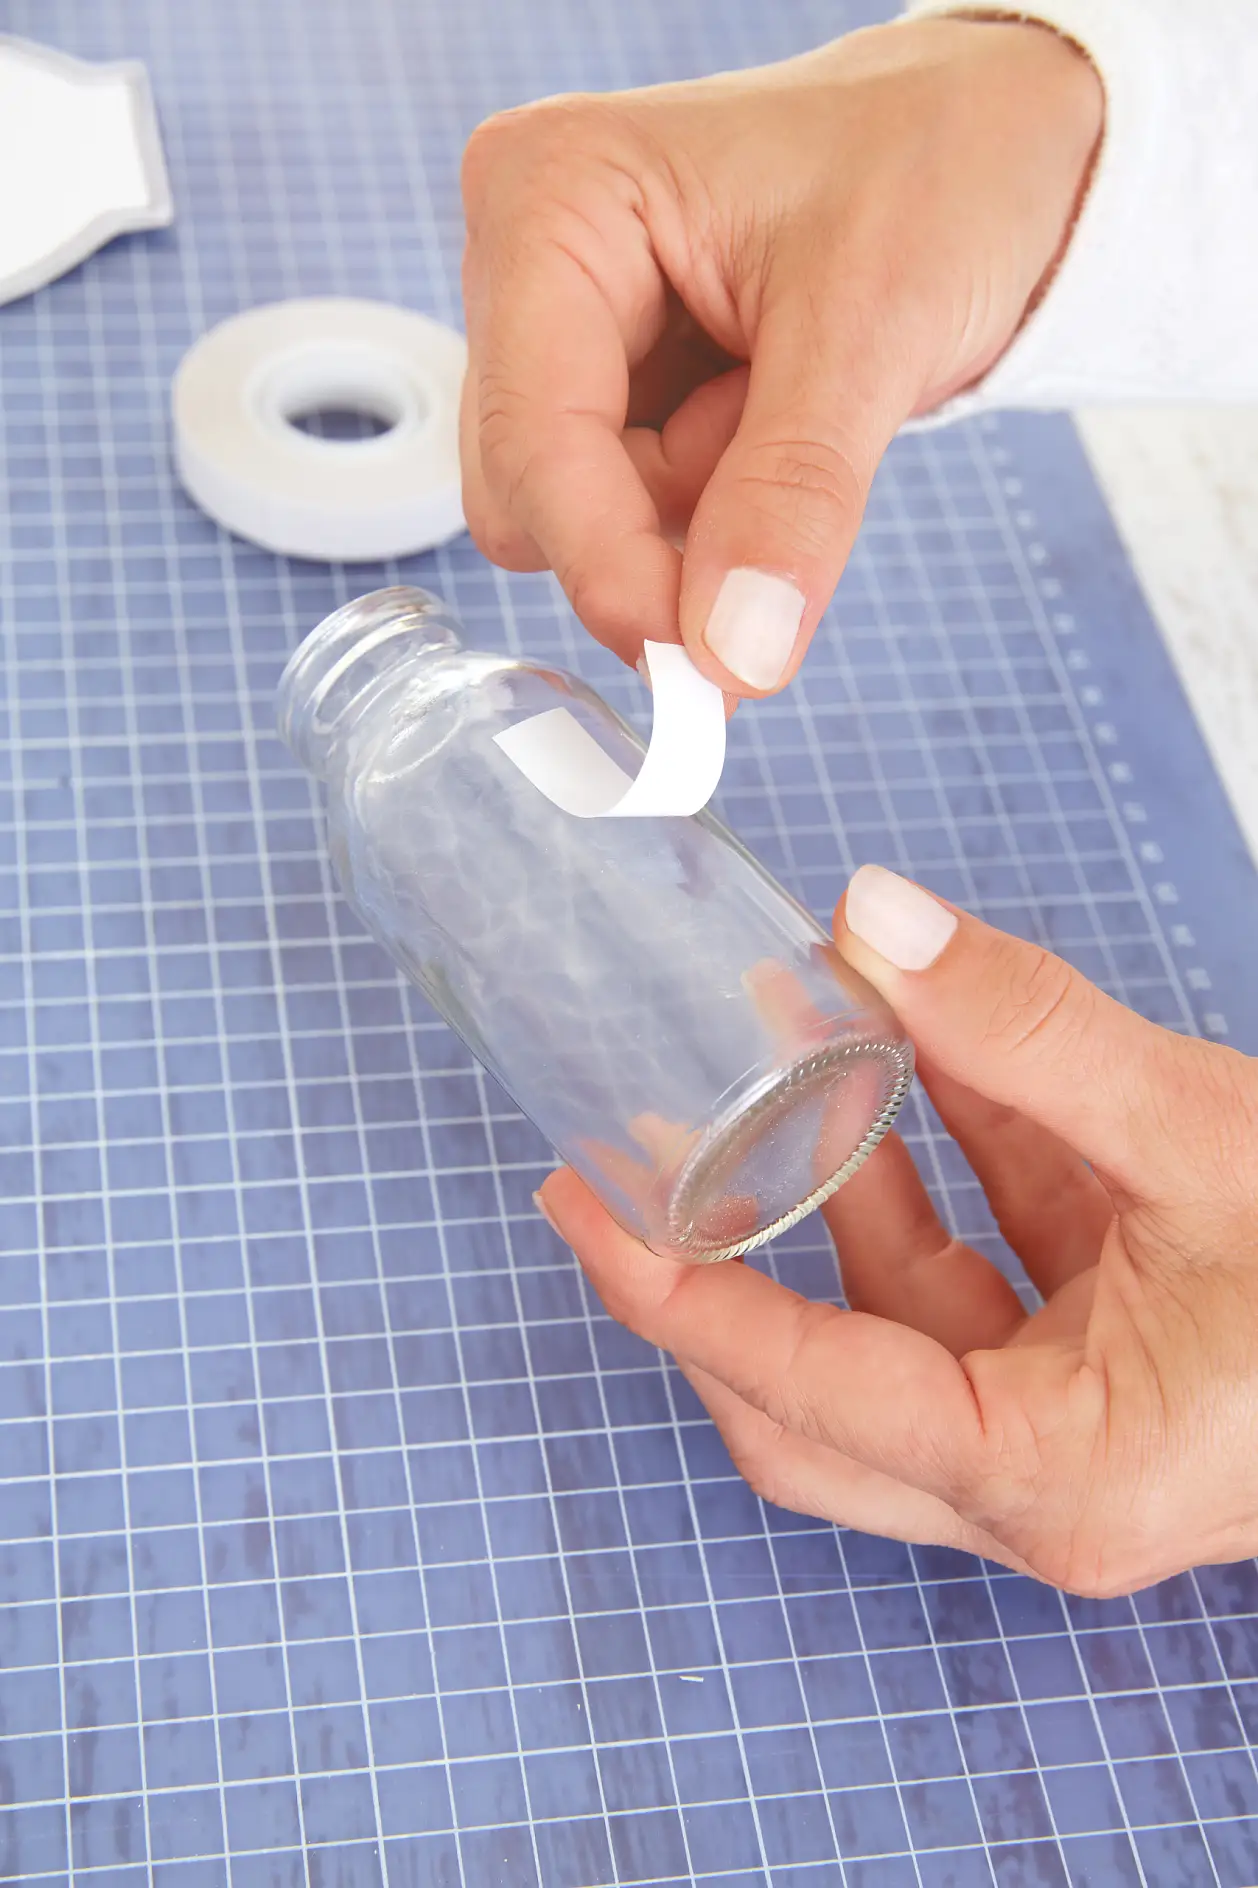 Apply a strip of tesa® double-sided adhesive tape on the glass bottles. Remove the protective film.